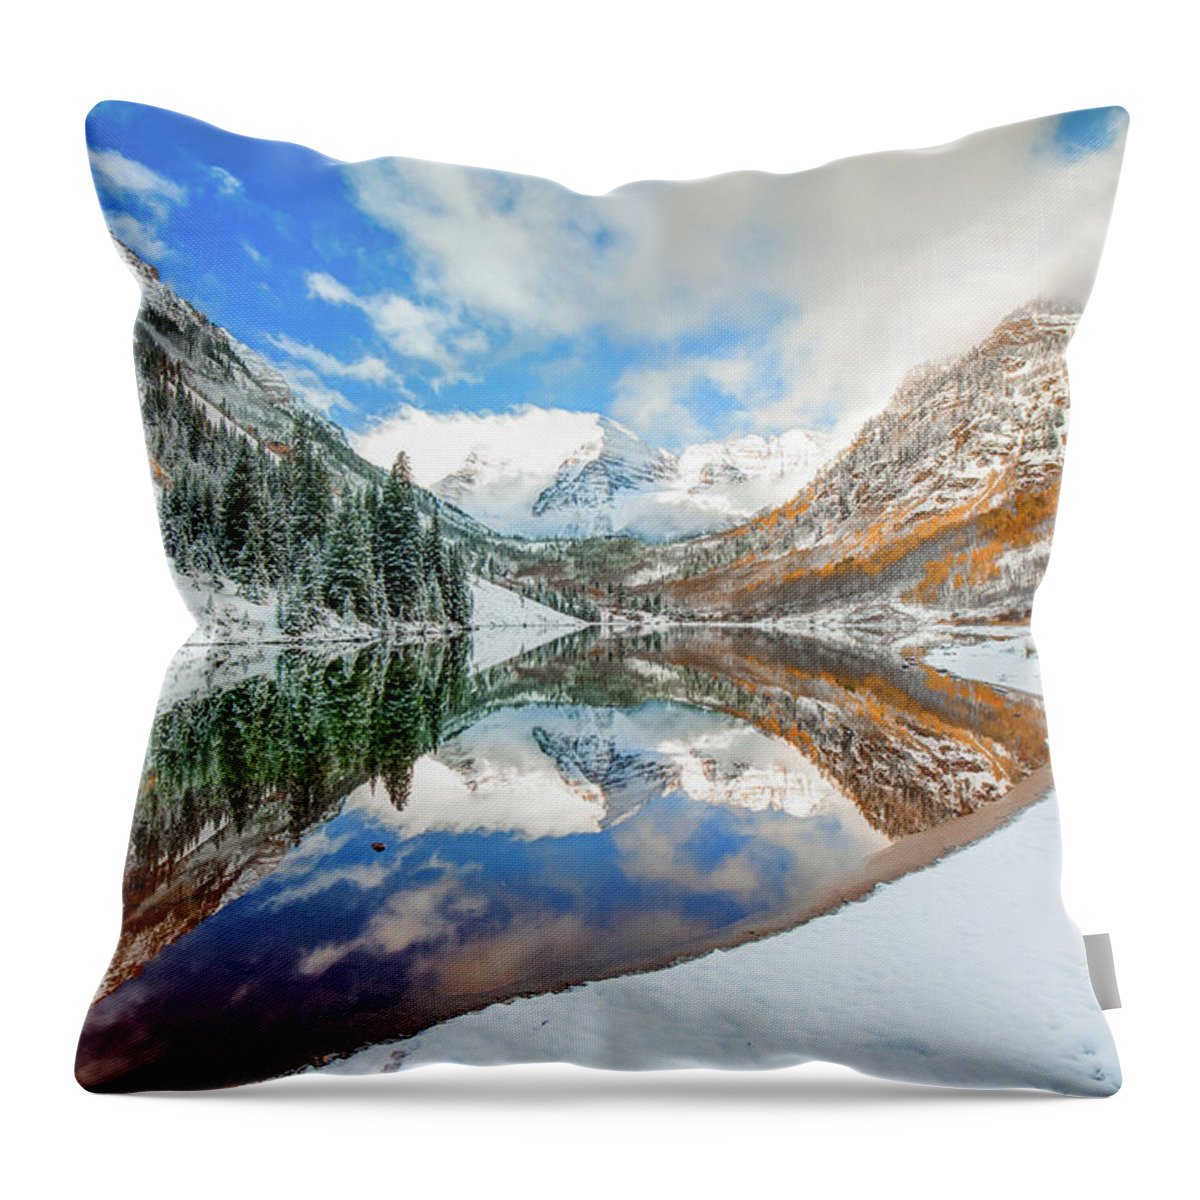 Maroon Bells Throw Pillow featuring the photograph Natures Divine Canvas - Maroon Bells Aspen Colorado by Gregory Ballos